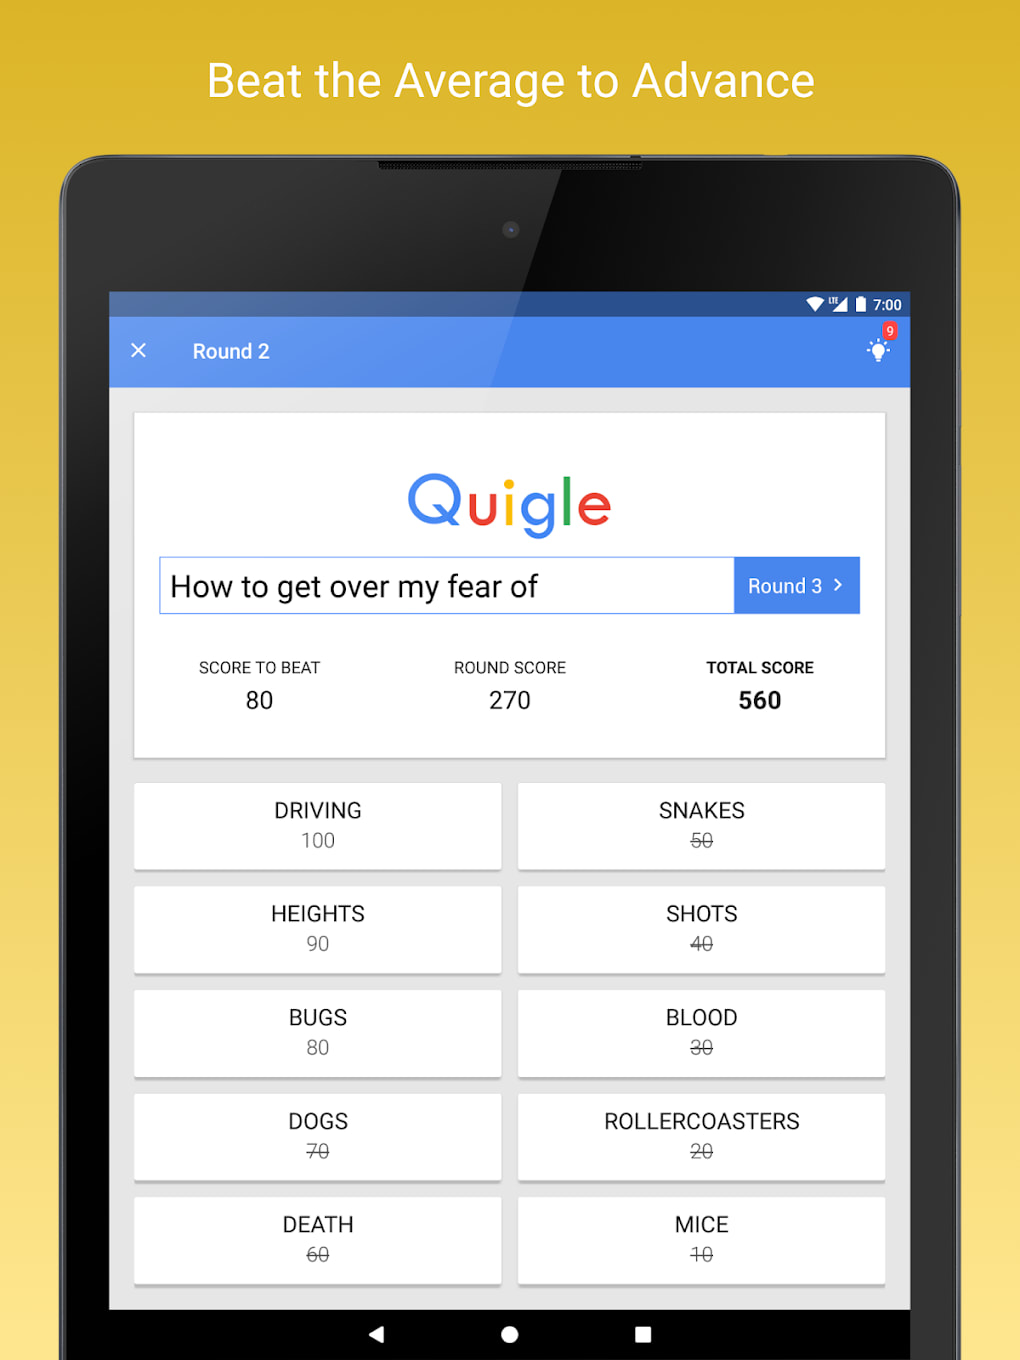 Quigle - Google Feud + Quiz APK (Android Game) - Free Download